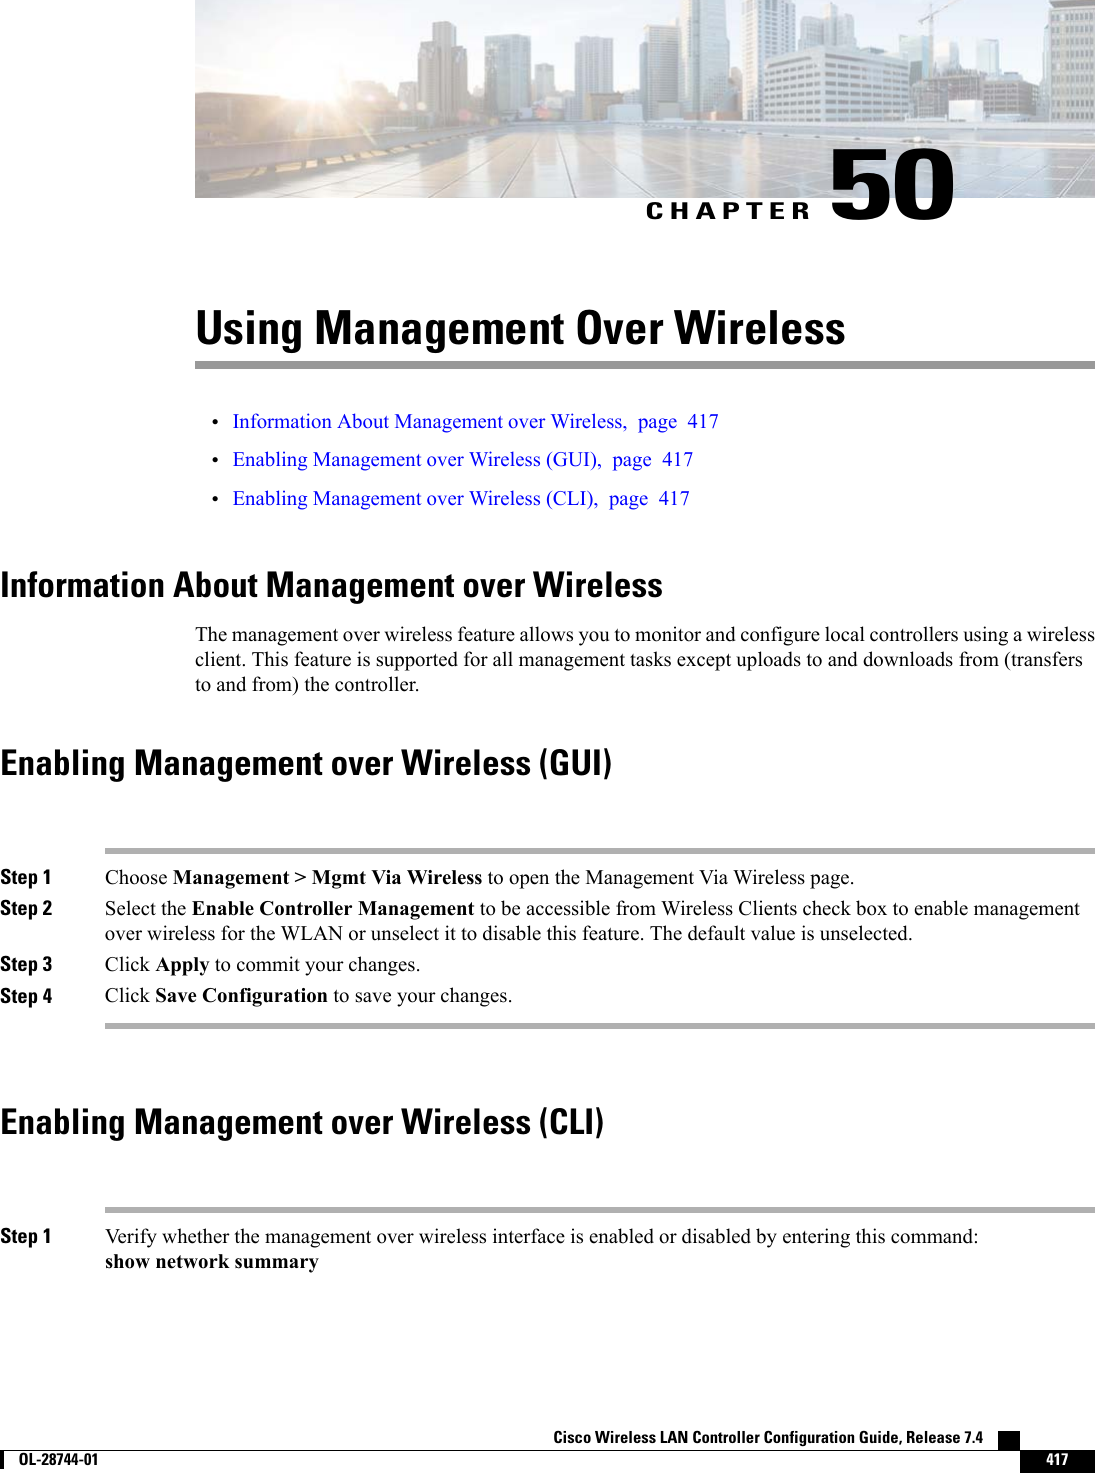 CHAPTER 50Using Management Over Wireless•Information About Management over Wireless, page 417•Enabling Management over Wireless (GUI), page 417•Enabling Management over Wireless (CLI), page 417Information About Management over WirelessThe management over wireless feature allows you to monitor and configure local controllers using a wirelessclient. This feature is supported for all management tasks except uploads to and downloads from (transfersto and from) the controller.Enabling Management over Wireless (GUI)Step 1 Choose Management &gt; Mgmt Via Wireless to open the Management Via Wireless page.Step 2 Select the Enable Controller Management to be accessible from Wireless Clients check box to enable managementover wireless for the WLAN or unselect it to disable this feature. The default value is unselected.Step 3 Click Apply to commit your changes.Step 4 Click Save Configuration to save your changes.Enabling Management over Wireless (CLI)Step 1 Verify whether the management over wireless interface is enabled or disabled by entering this command:show network summaryCisco Wireless LAN Controller Configuration Guide, Release 7.4        OL-28744-01 417